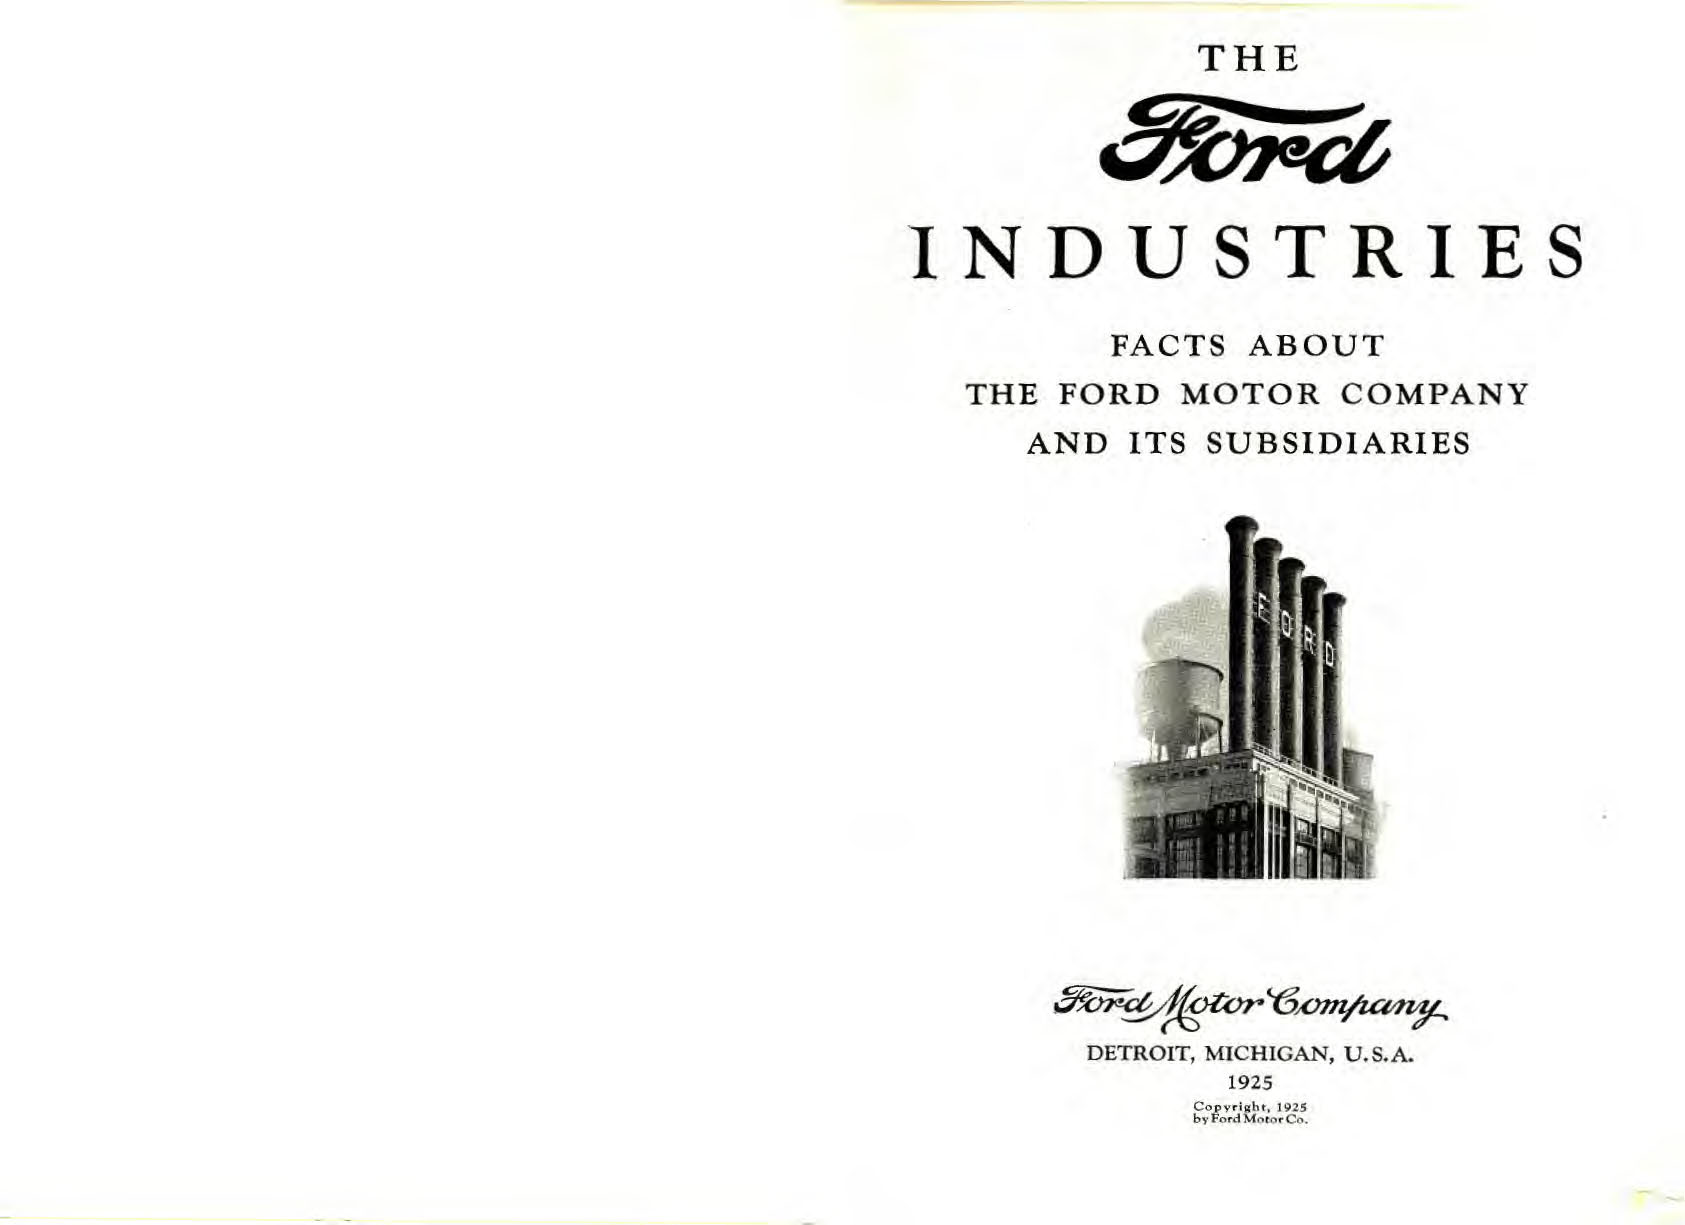 1925_-The_Ford_Industries-002-003